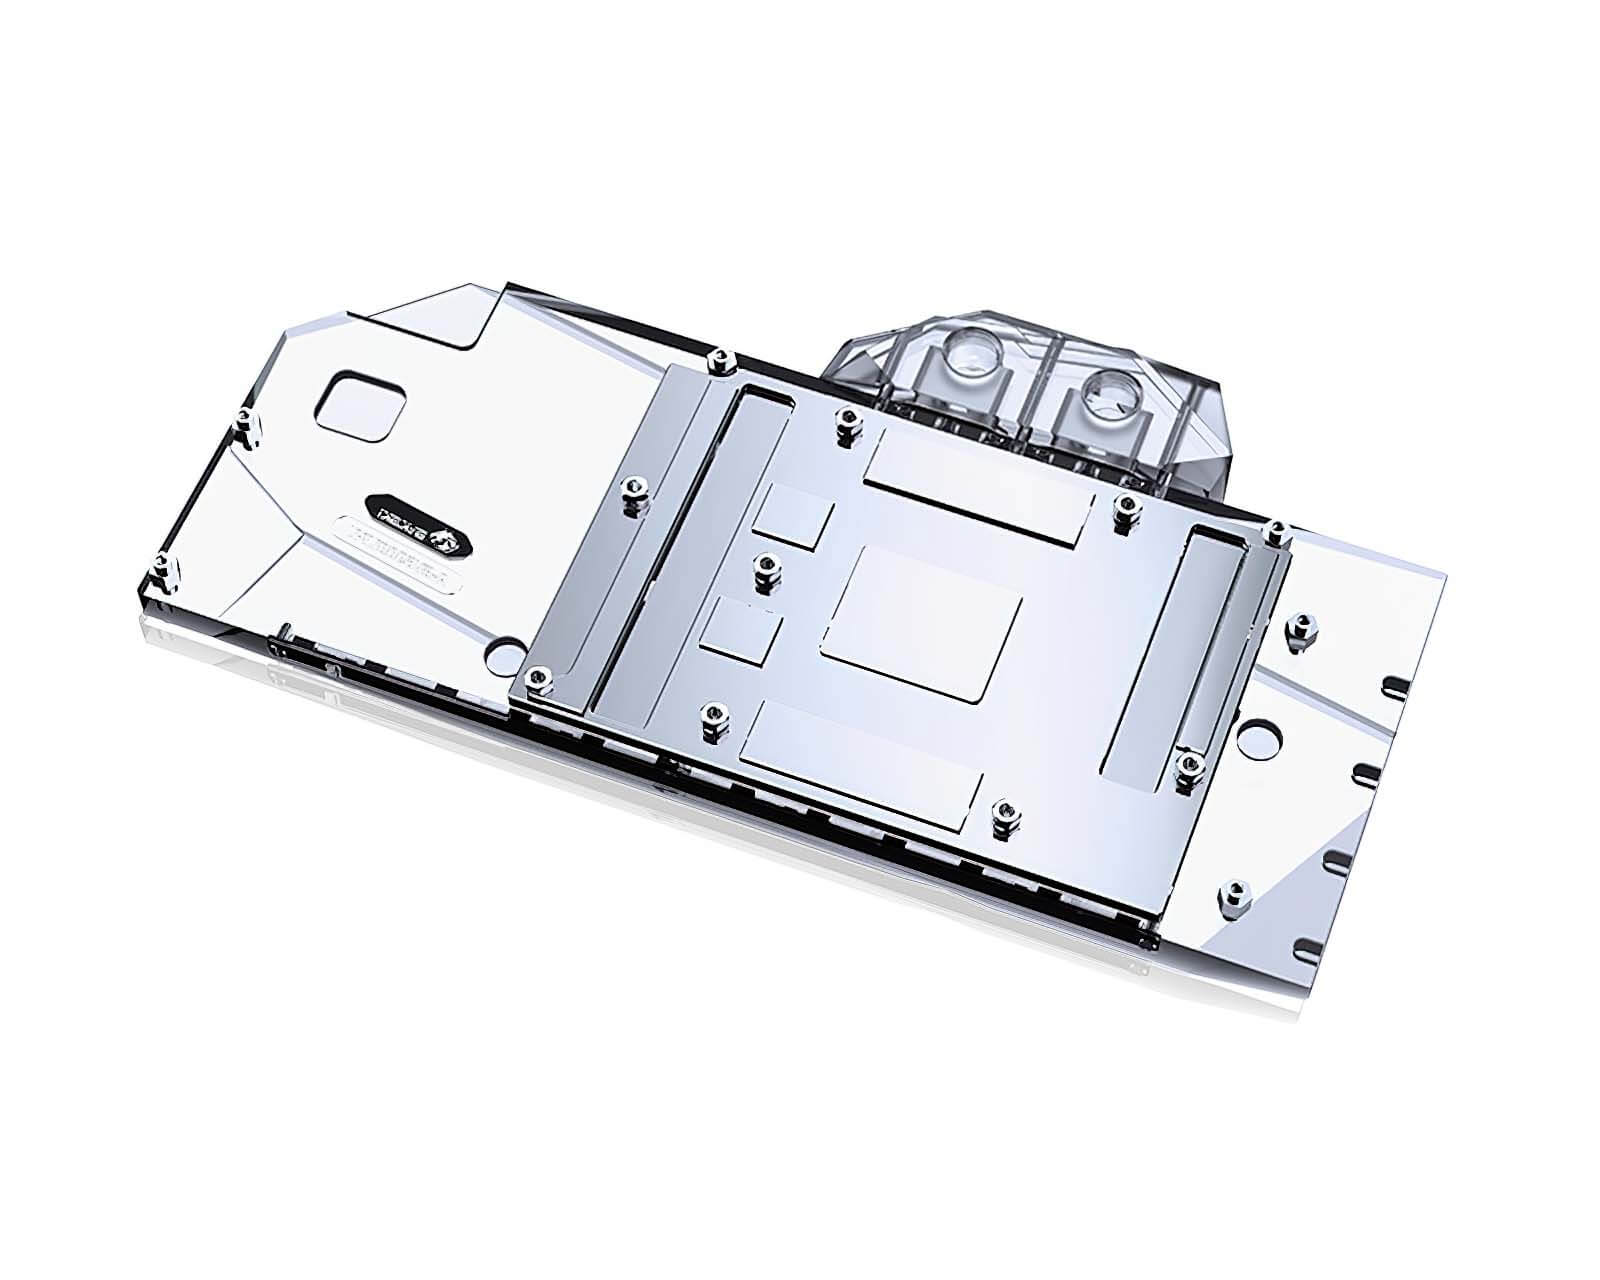 Bykski Full Coverage GPU Water Block and Backplate for Gigabyte RX 6800 / 6900XT Gaming OC (A-GV6900XT-X) - PrimoChill - KEEPING IT COOL